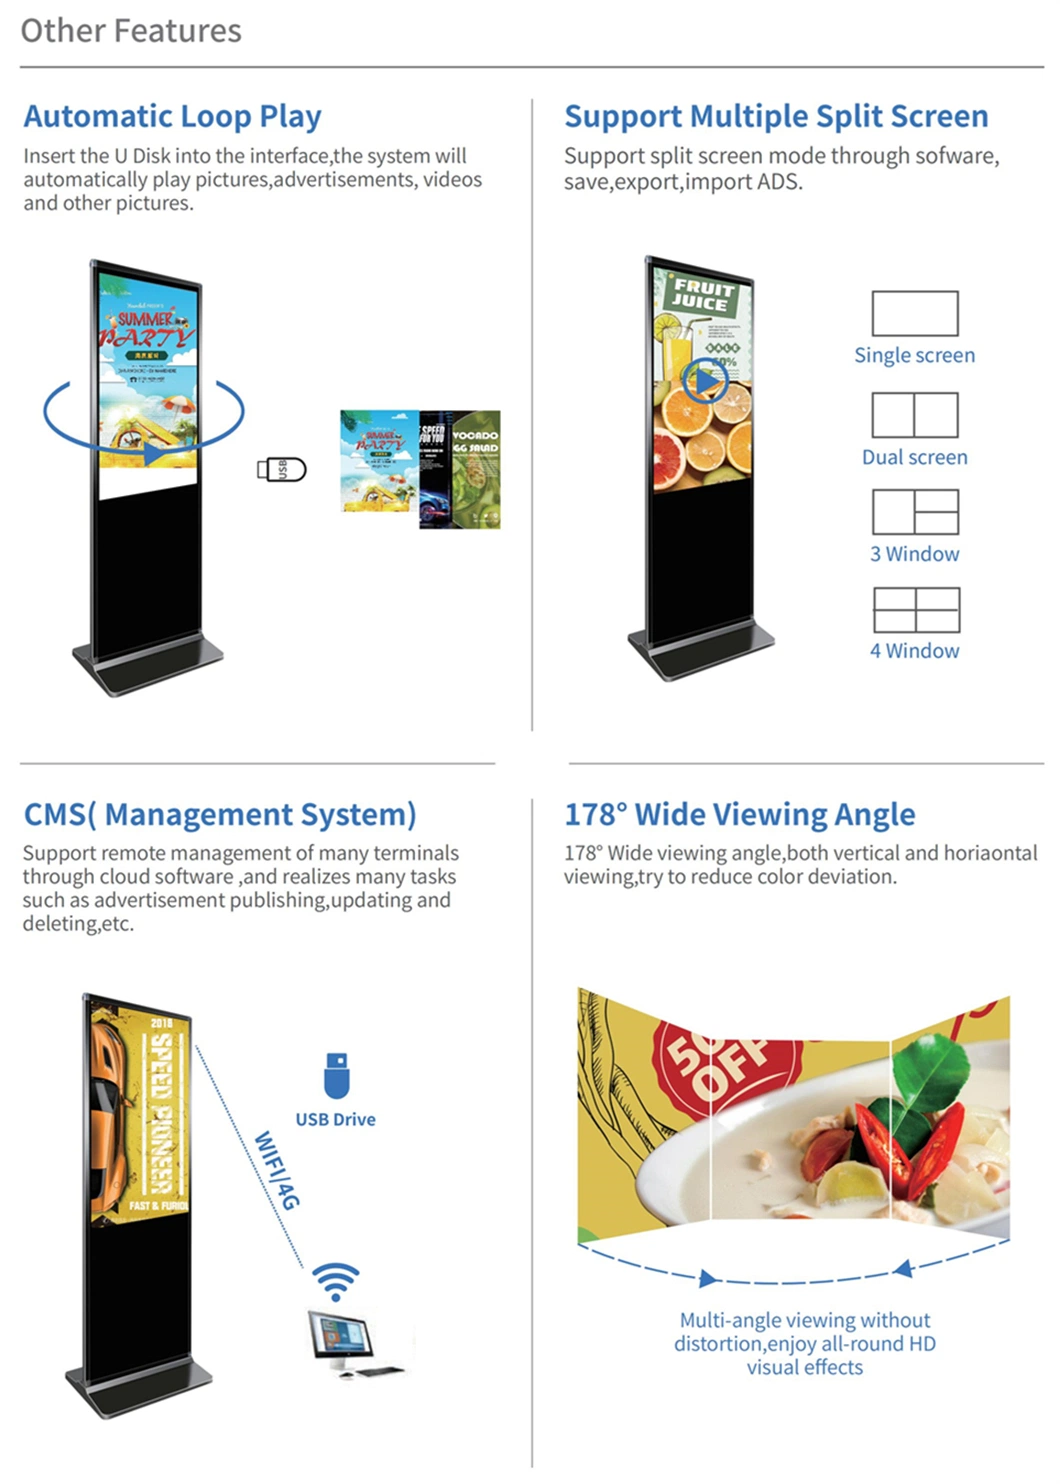 Best Price for Shopping Mall 42 Inch Stand Floor Touch Screen Kiosk All in One Computer Digital Totem Advertising Touch Screen